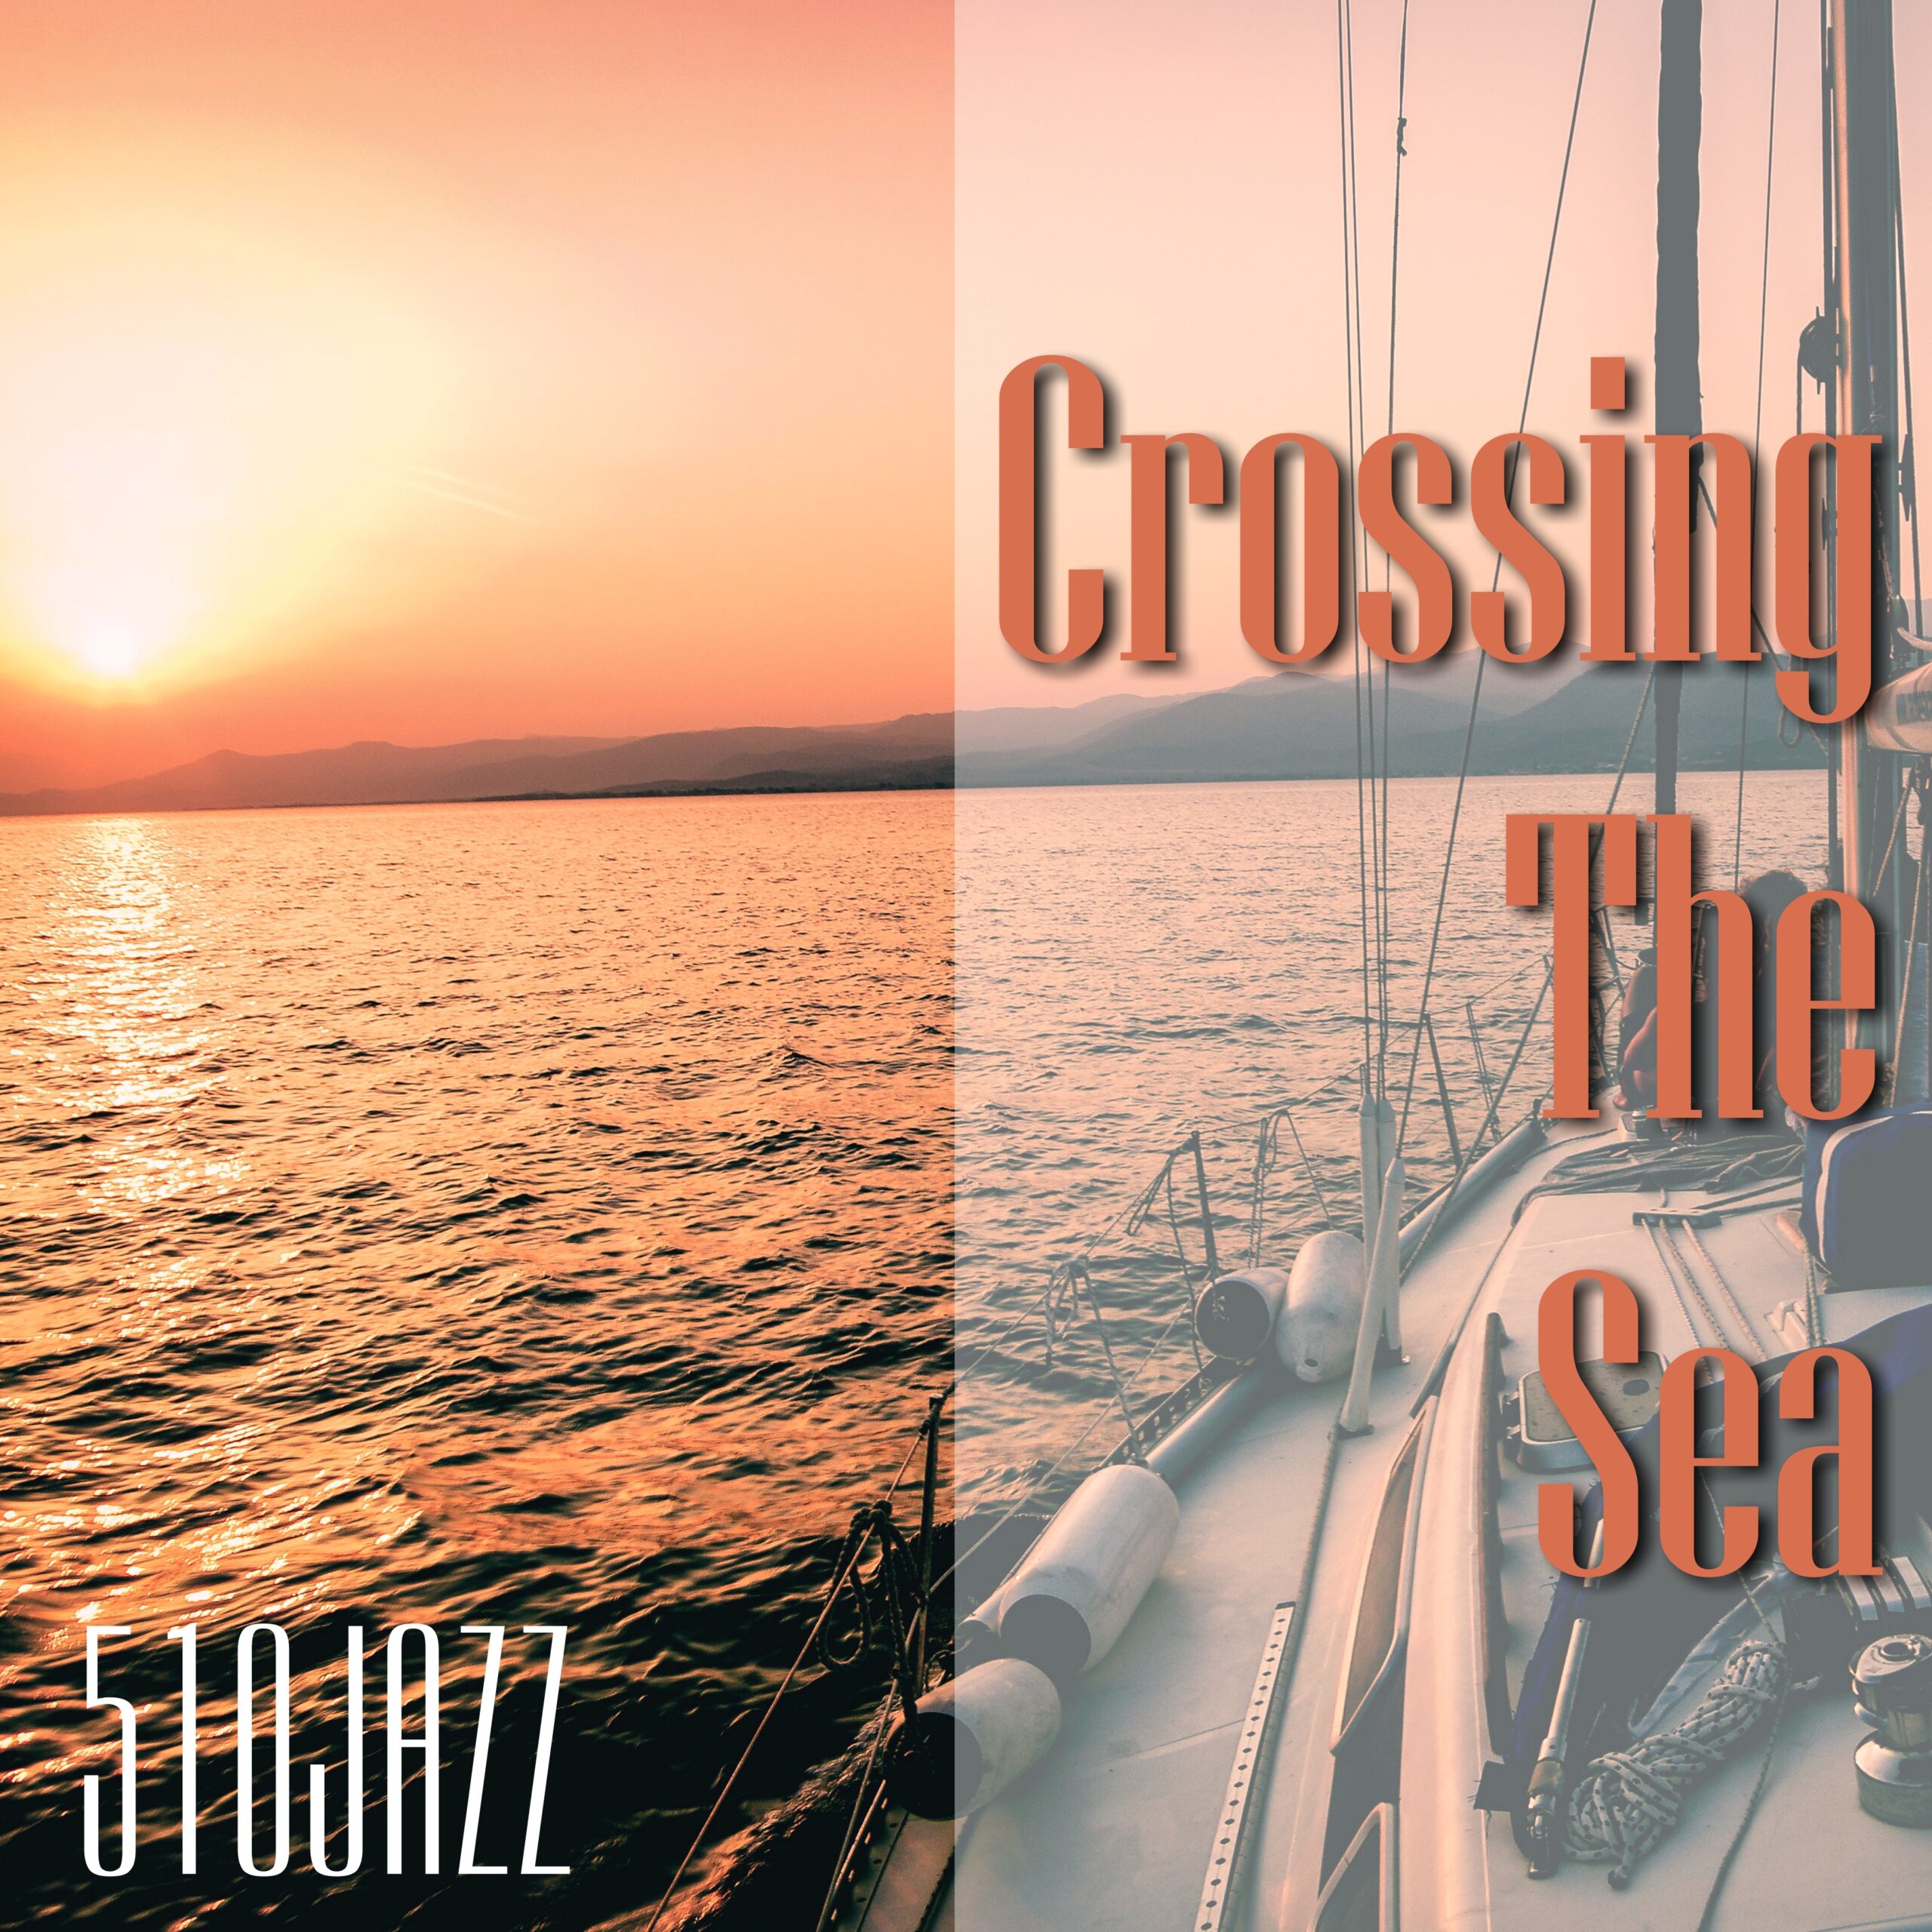 510JAZZ's "Crossing The Sea" releases on September 16, on all major streaming and download platforms